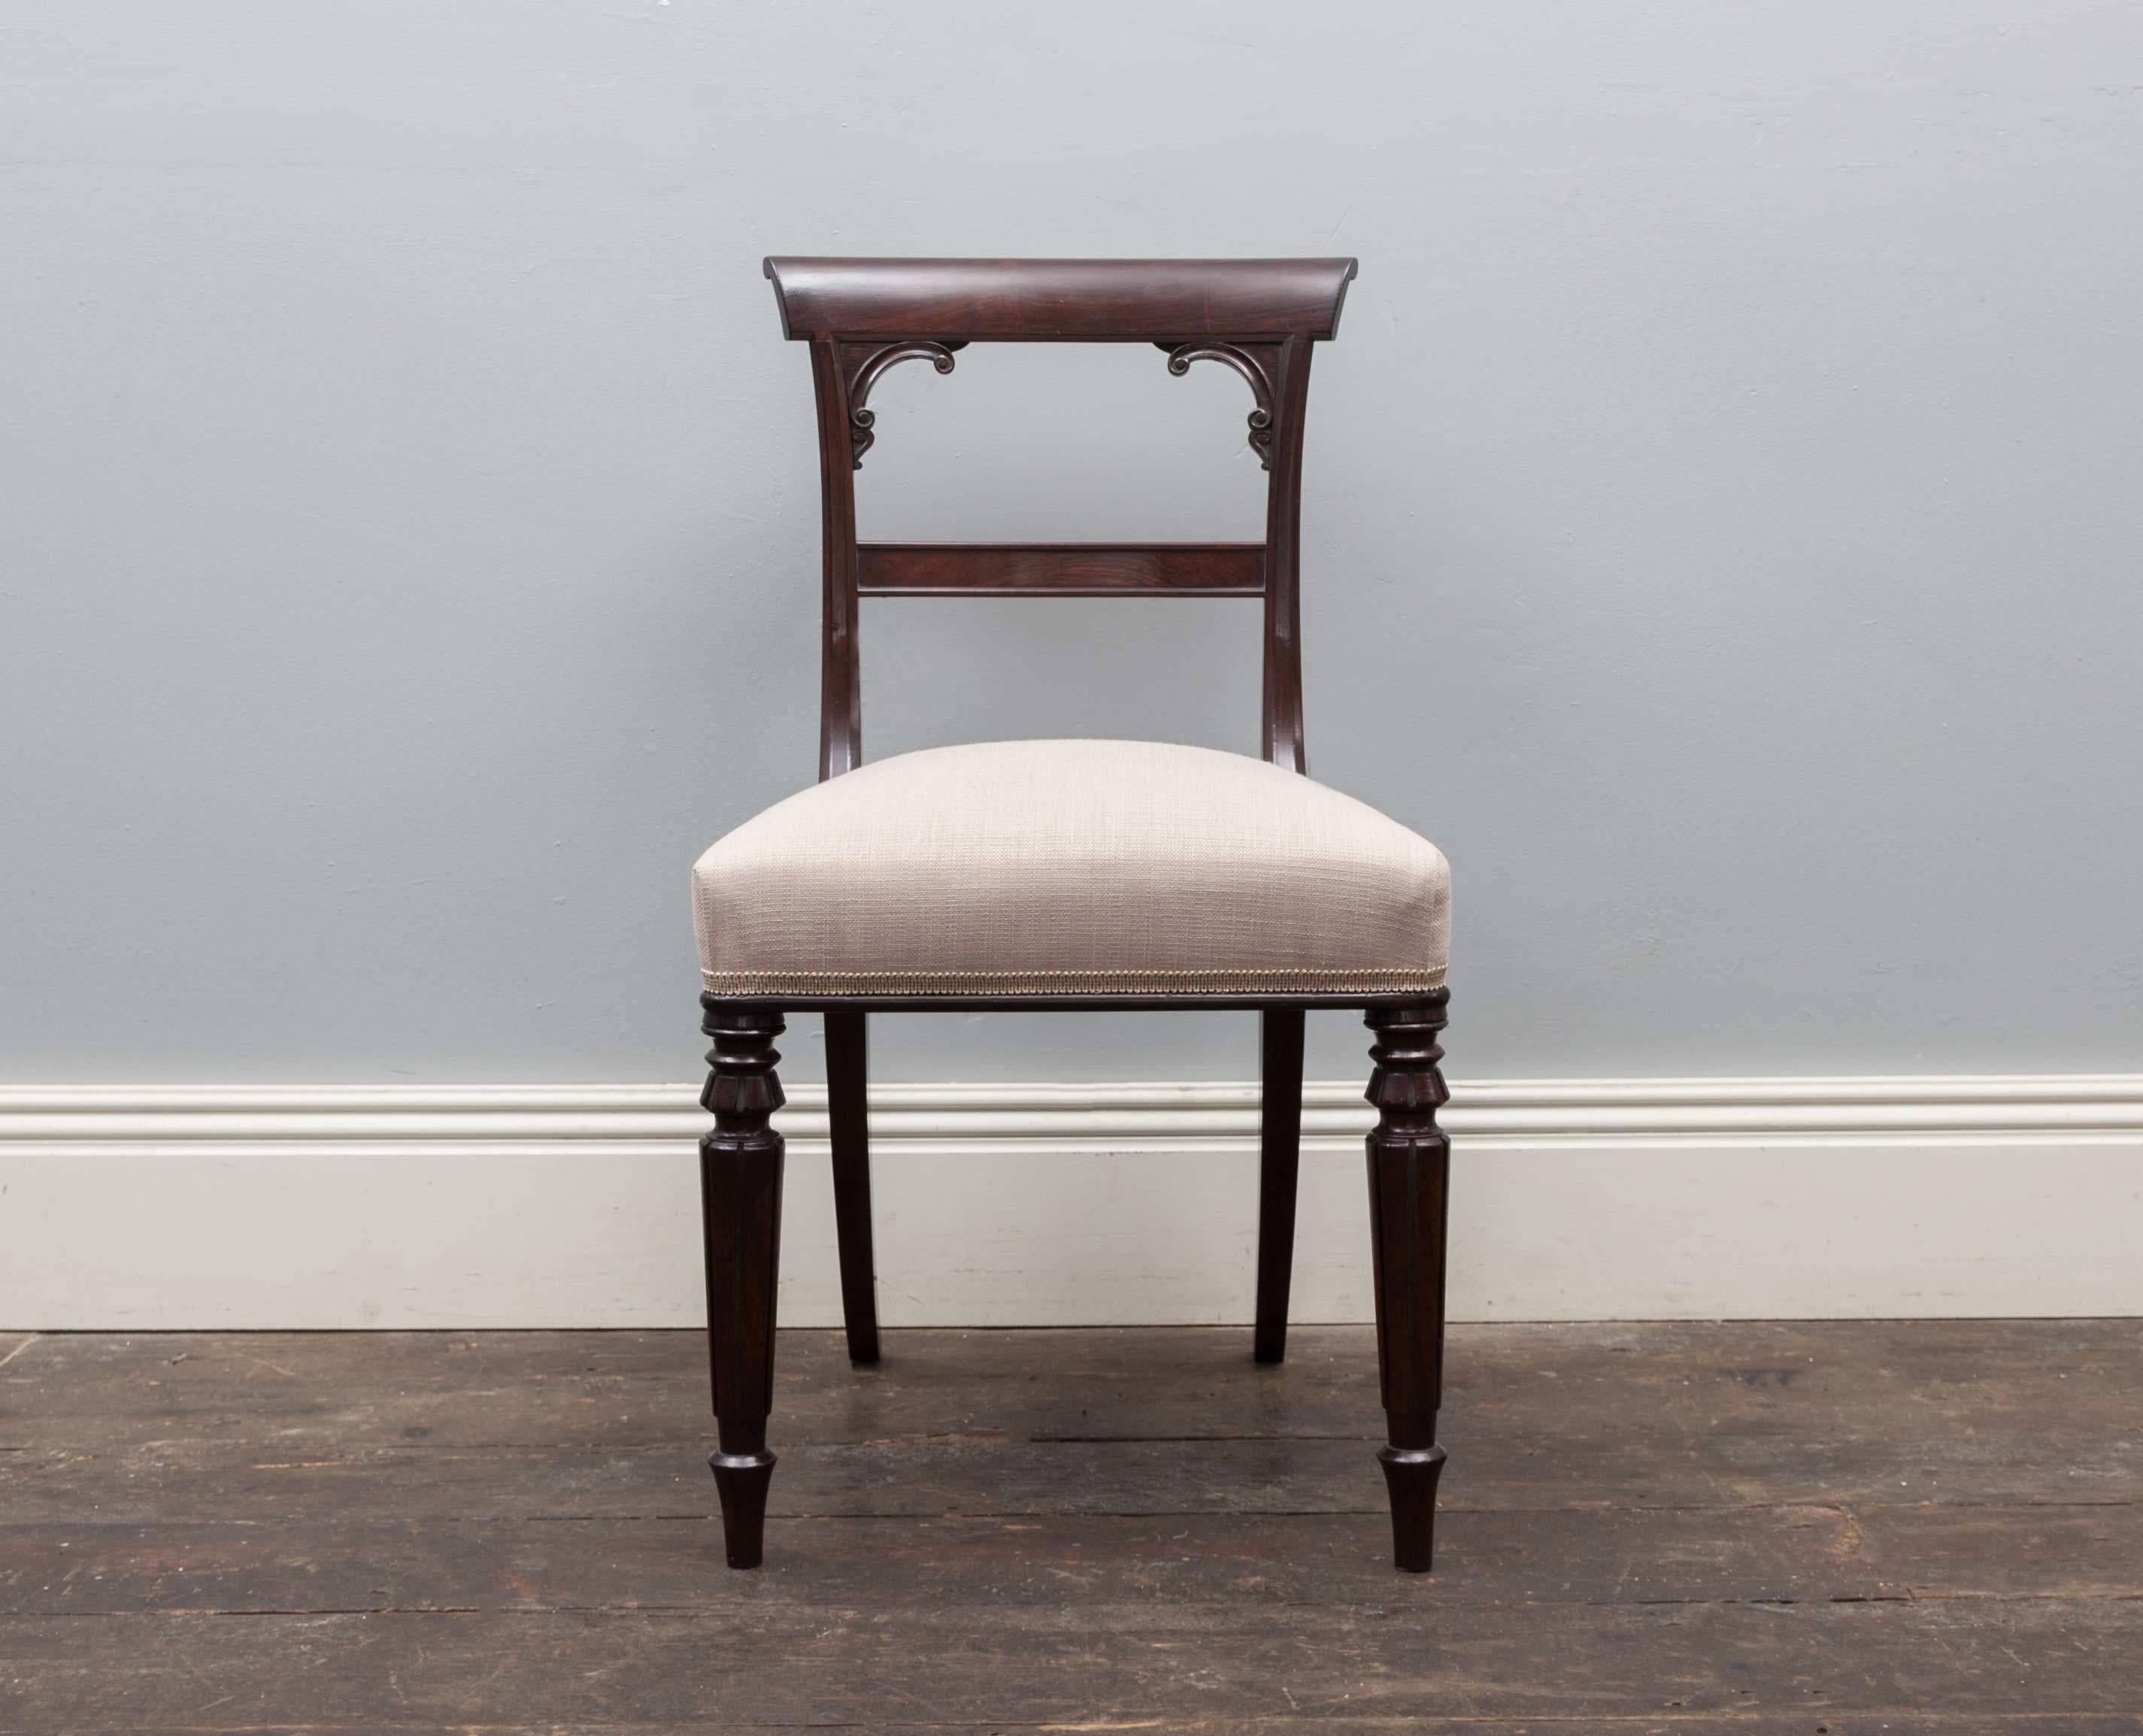 A set of ten elegant antique rosewood dining chairs. Produced during the Regency period, the chairs feature tapering turned legs, bar backs with scroll corners and neutral fabric coverings.
Beautifully made from the finest rosewood, deep and rich